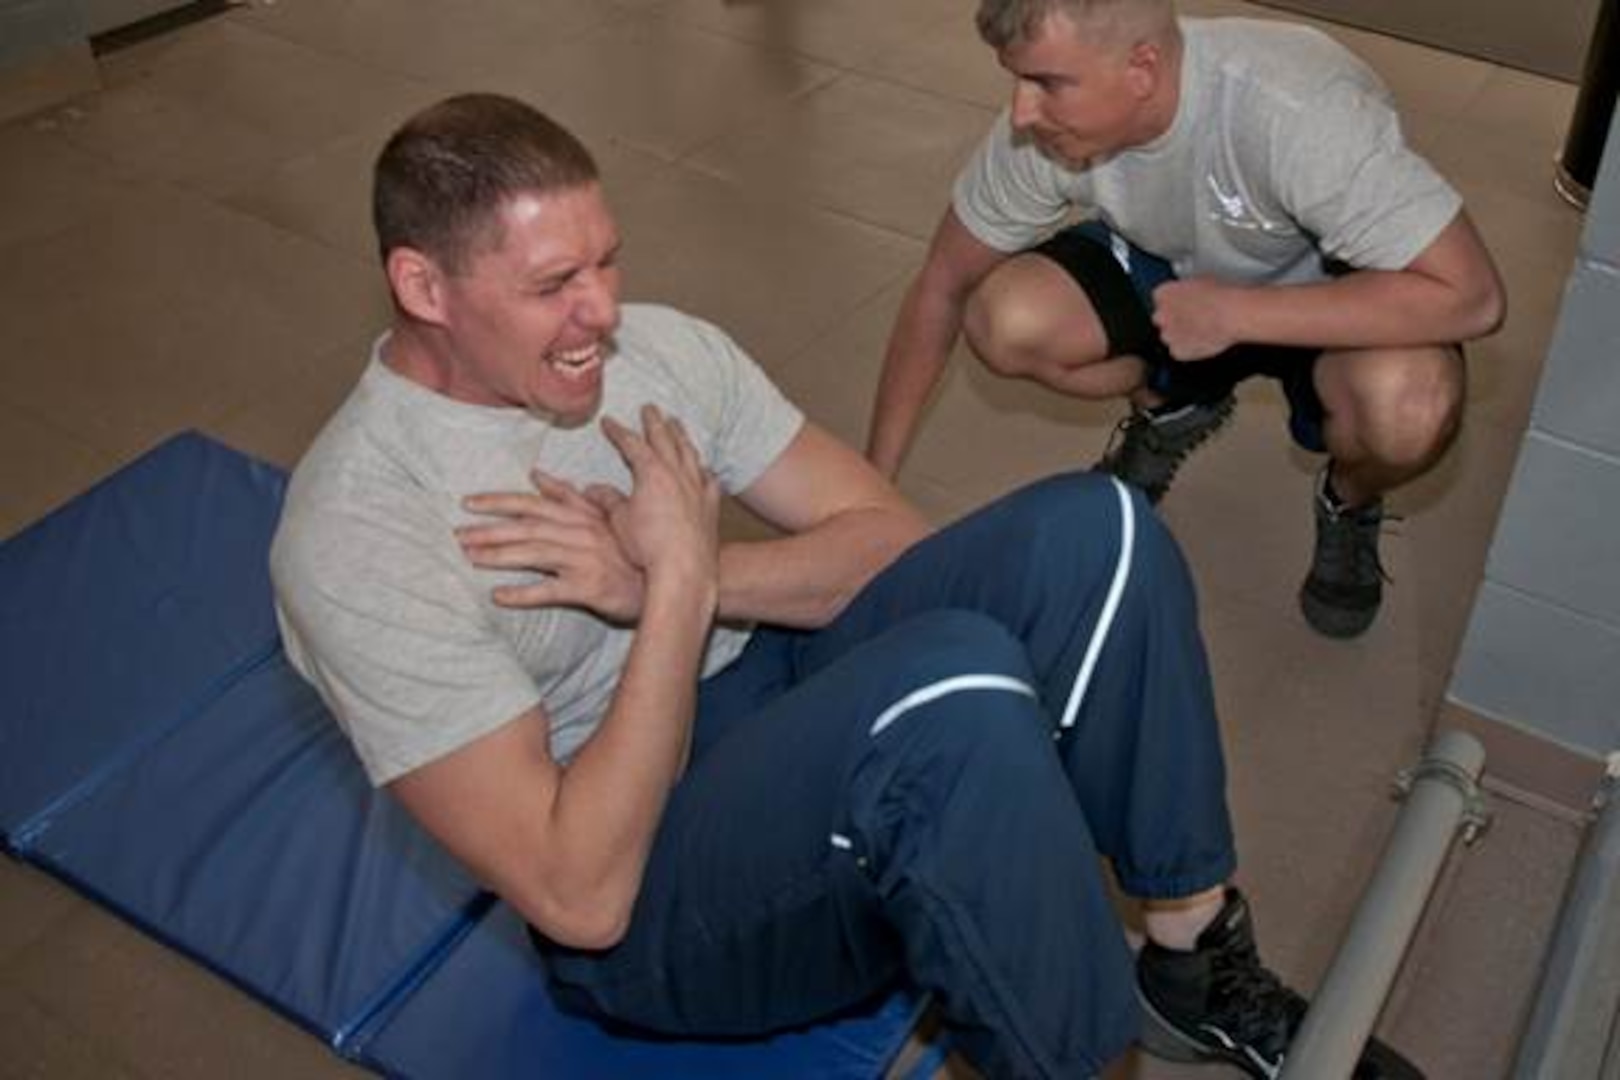 U.S. Air Force Senior Airman Allen Wright, a pavements and equipment operator assigned to the 307th RED HORSE performs sits ups during his physical fitness assessment at the Bell Fitness Center on Barksdale Air Force Base, La., Mar. 7, 2015. Each Airman must complete a one and a half mile run, a minimum number of pushups, and sit-ups in one minute, as well as meet an abdominal circumference measured. (U.S. Air Force photo by Master Sgt. Jeff Walston/Released)    